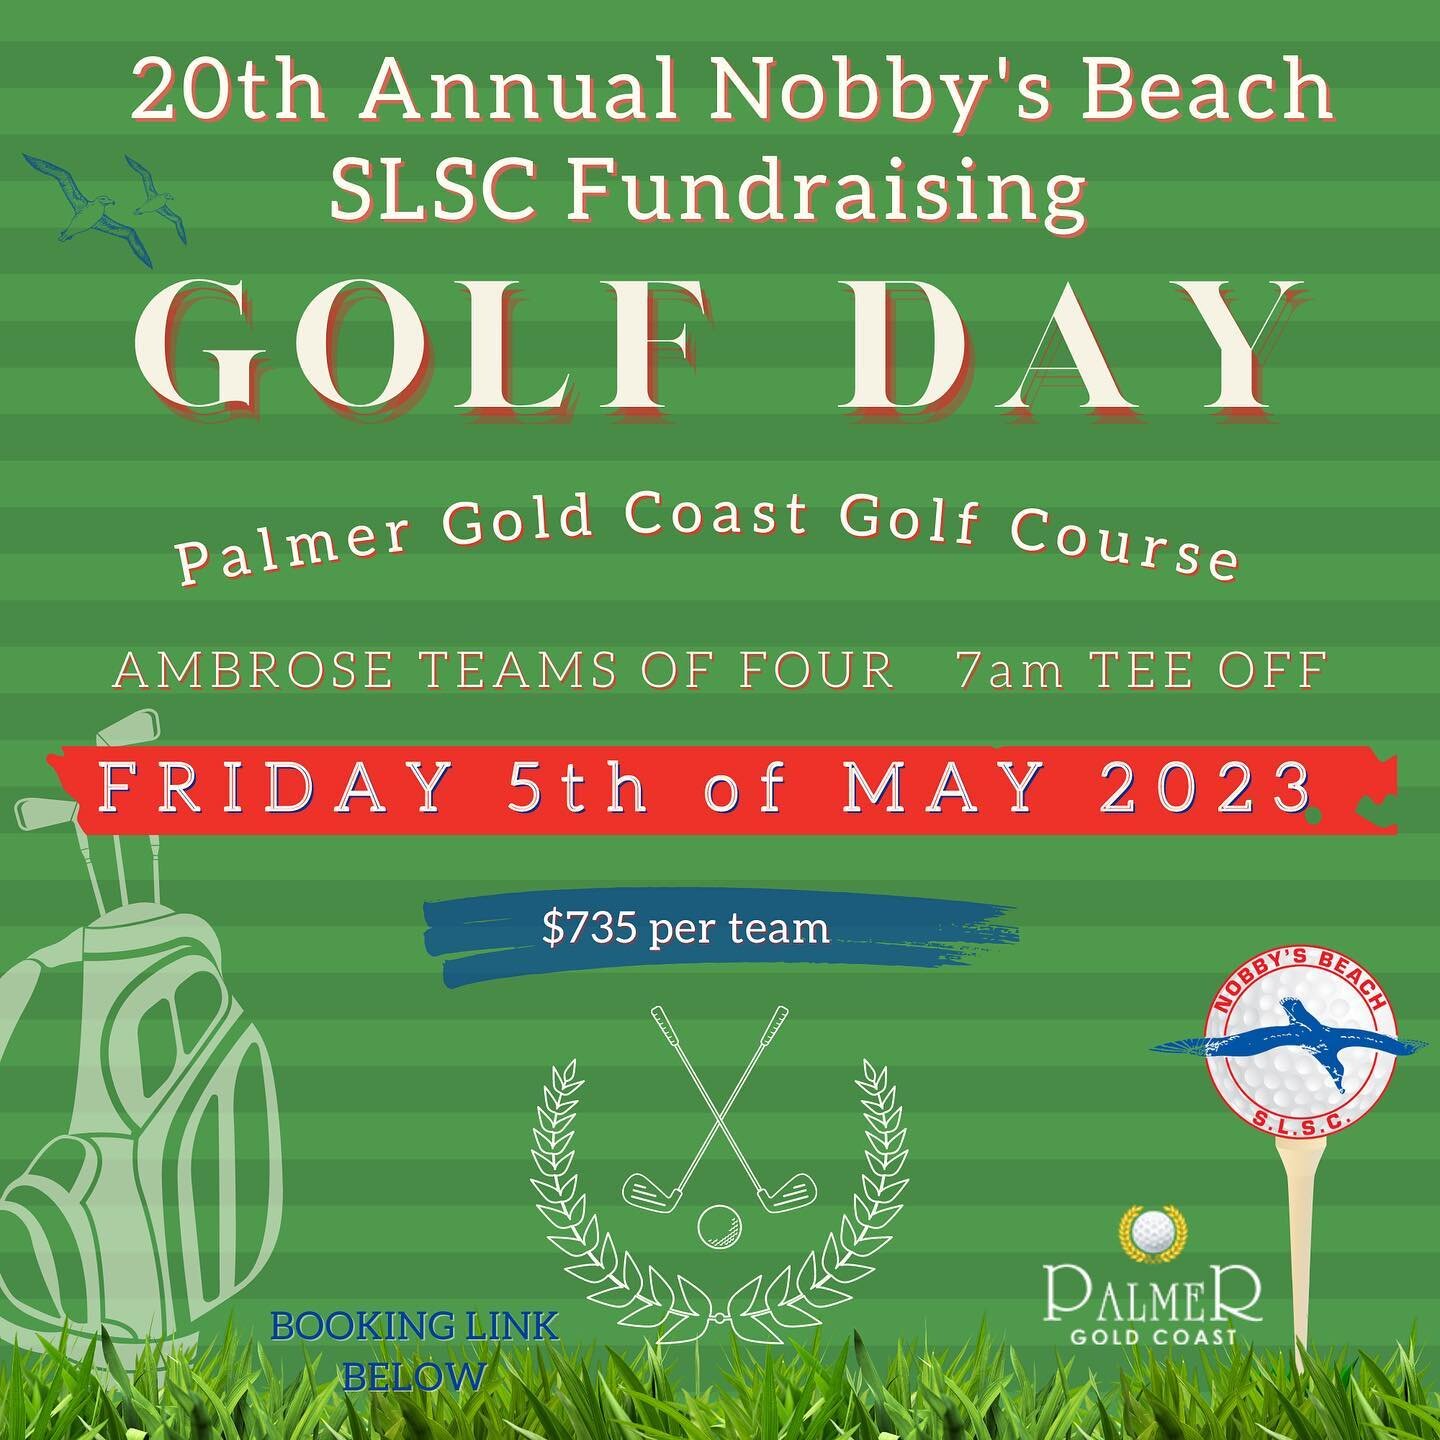 ⛳️BOOKINGS OPEN✨Come &amp; be part of our 20th Annual Fundraising Golf Day, enter a team, sponsor a hole donate a prize!
Tag your friends to gather your team now!🏌🏼&zwj;♂️🔴⚪️🔵⛳️
Link in bio for tickets &amp; more info 🎫